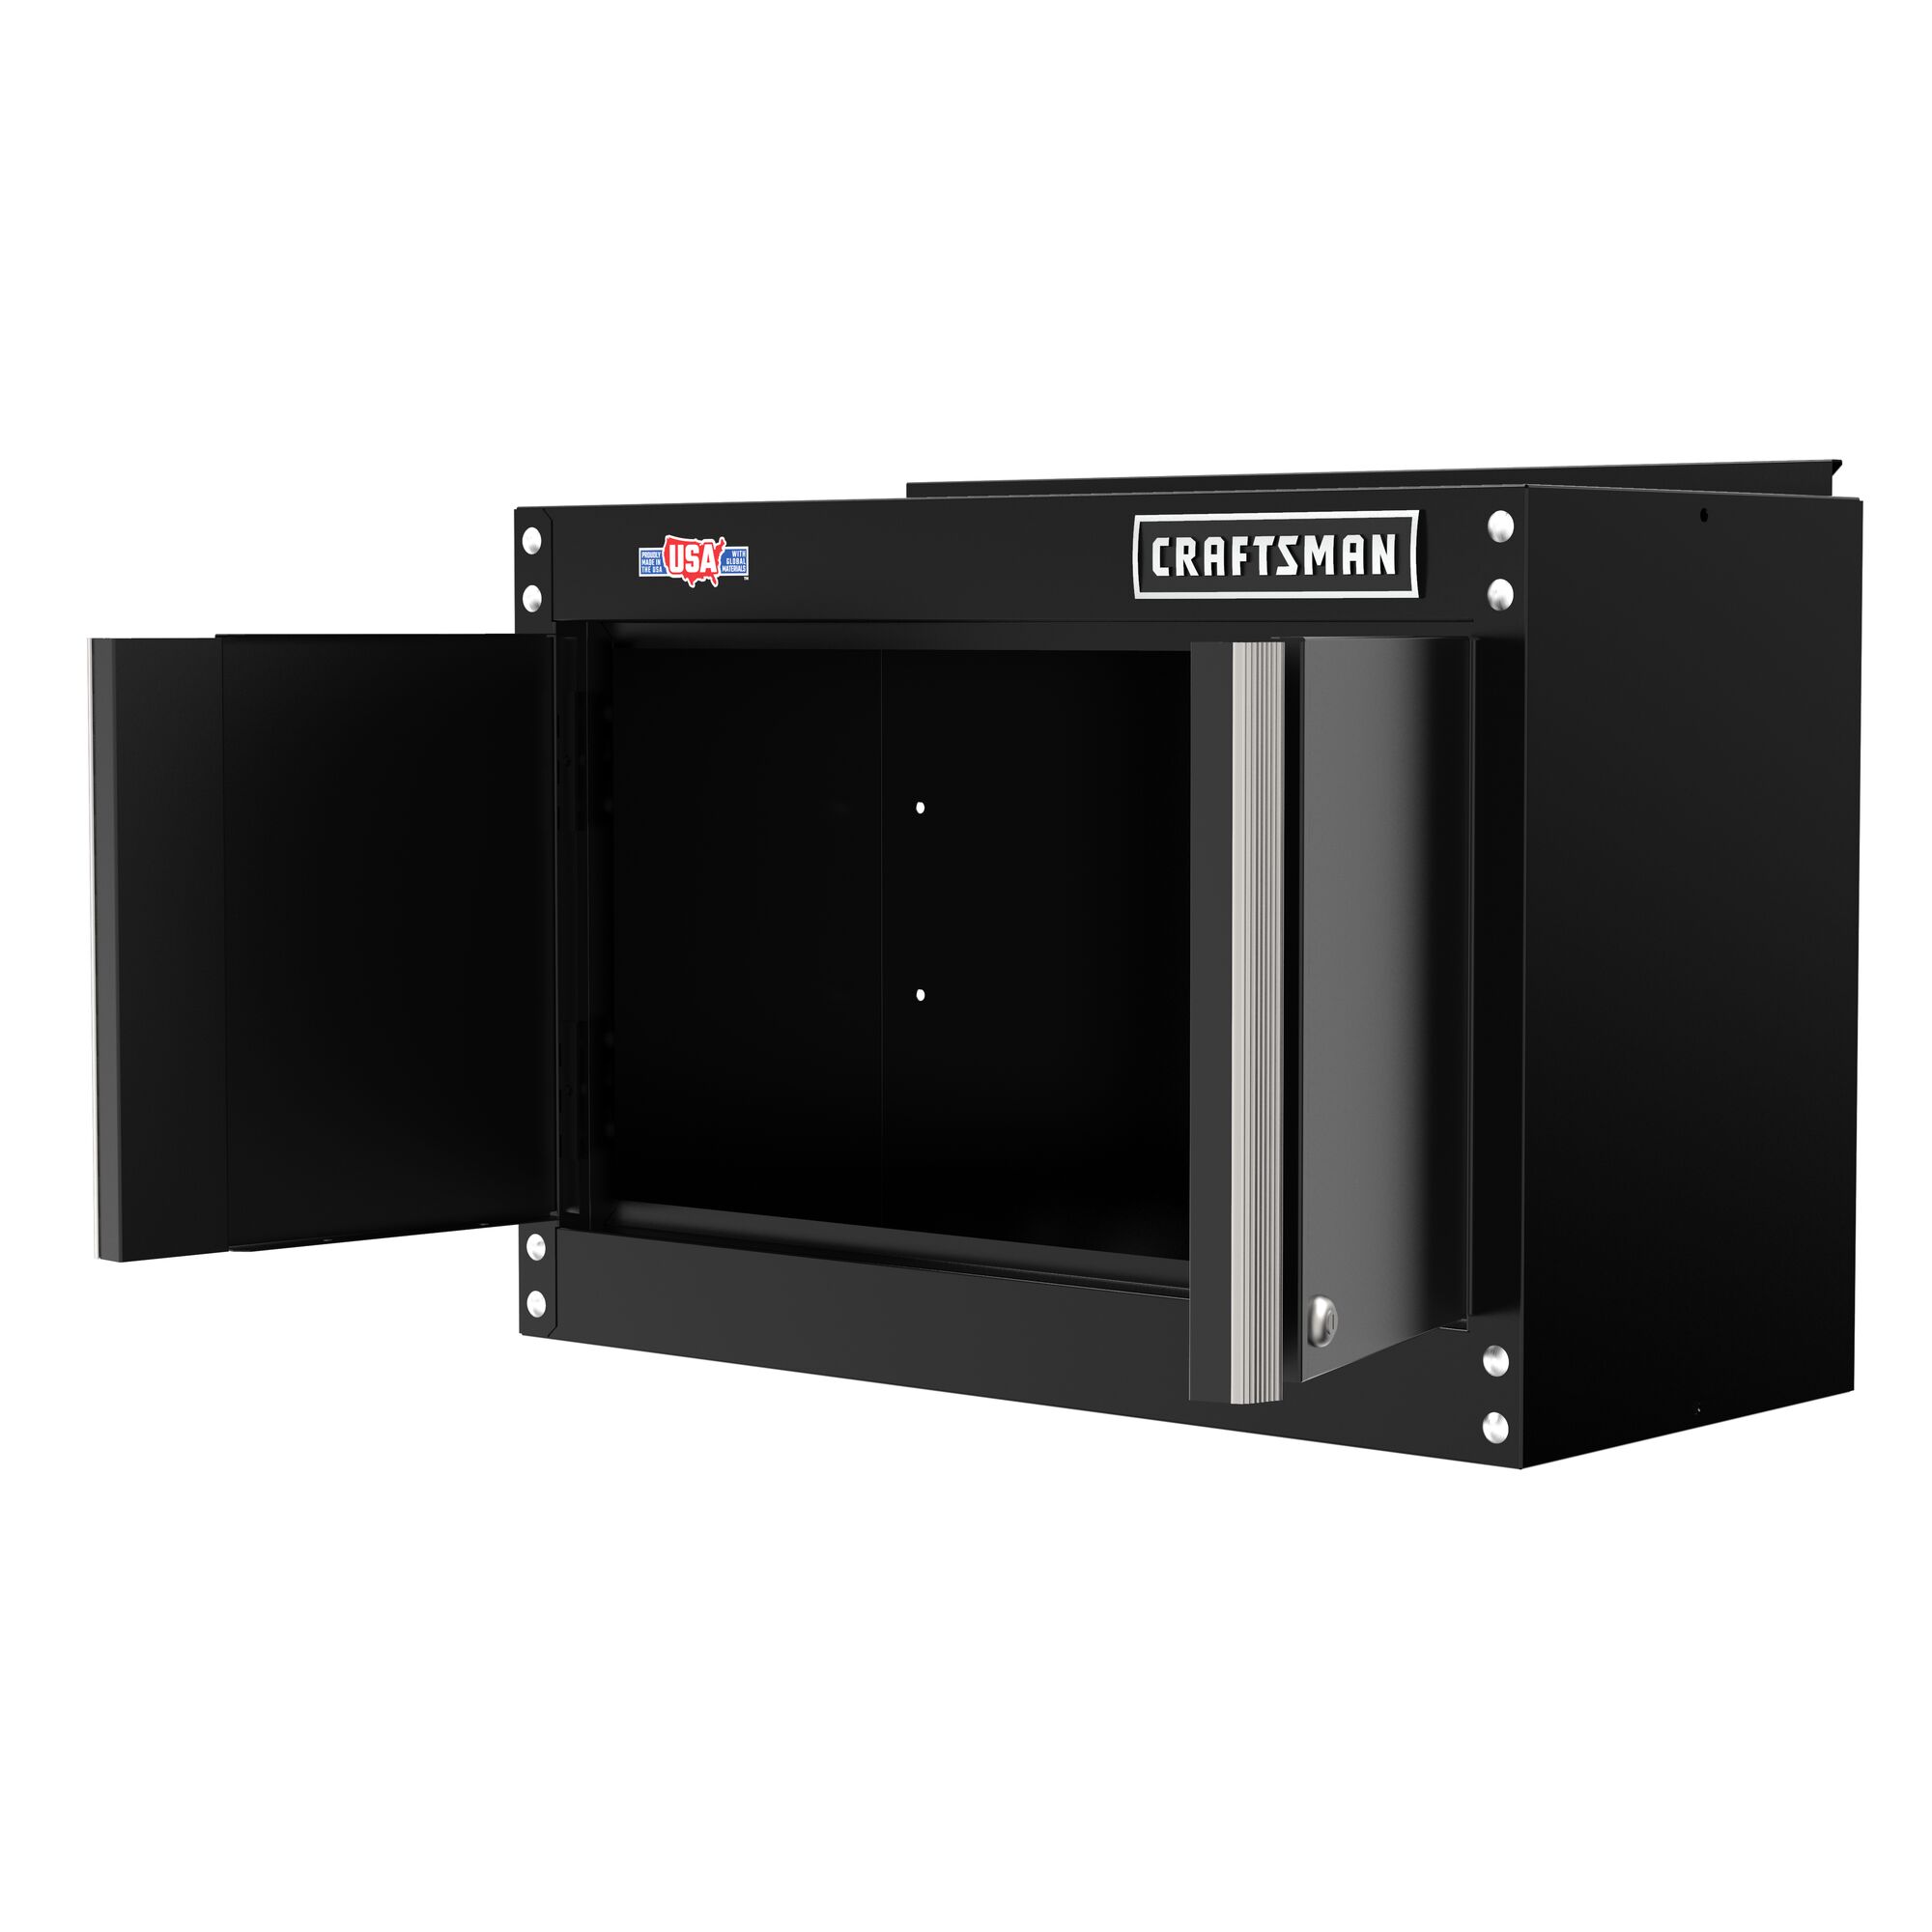 CRAFTSMAN 28-in wide by 18-in high storage wall cabinet angled view with doors open